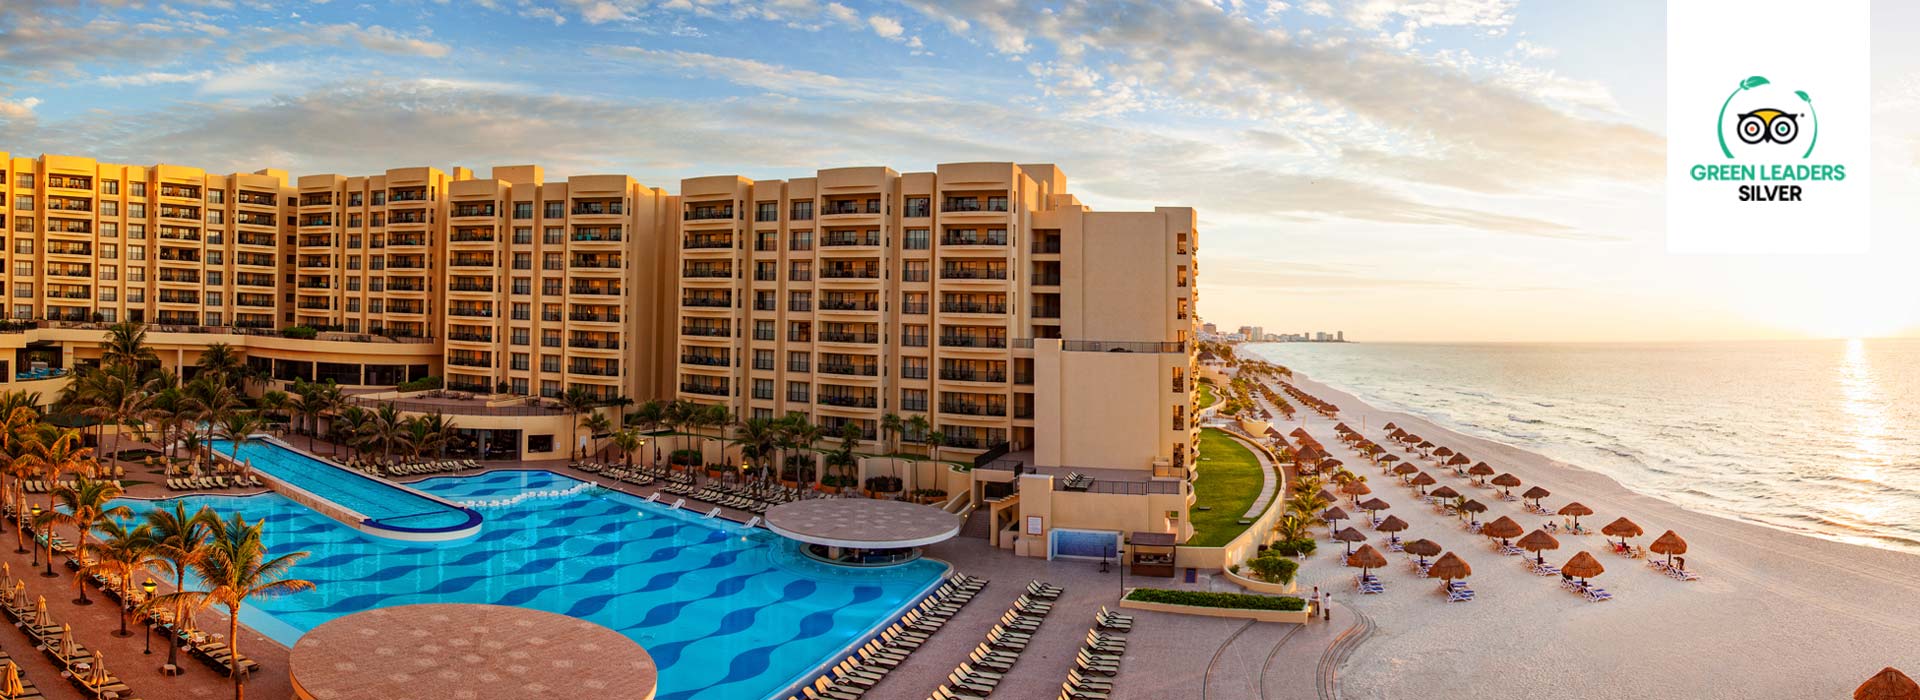 The Royal Sands is a Cancun beachfront resort that will exceed all your dreams